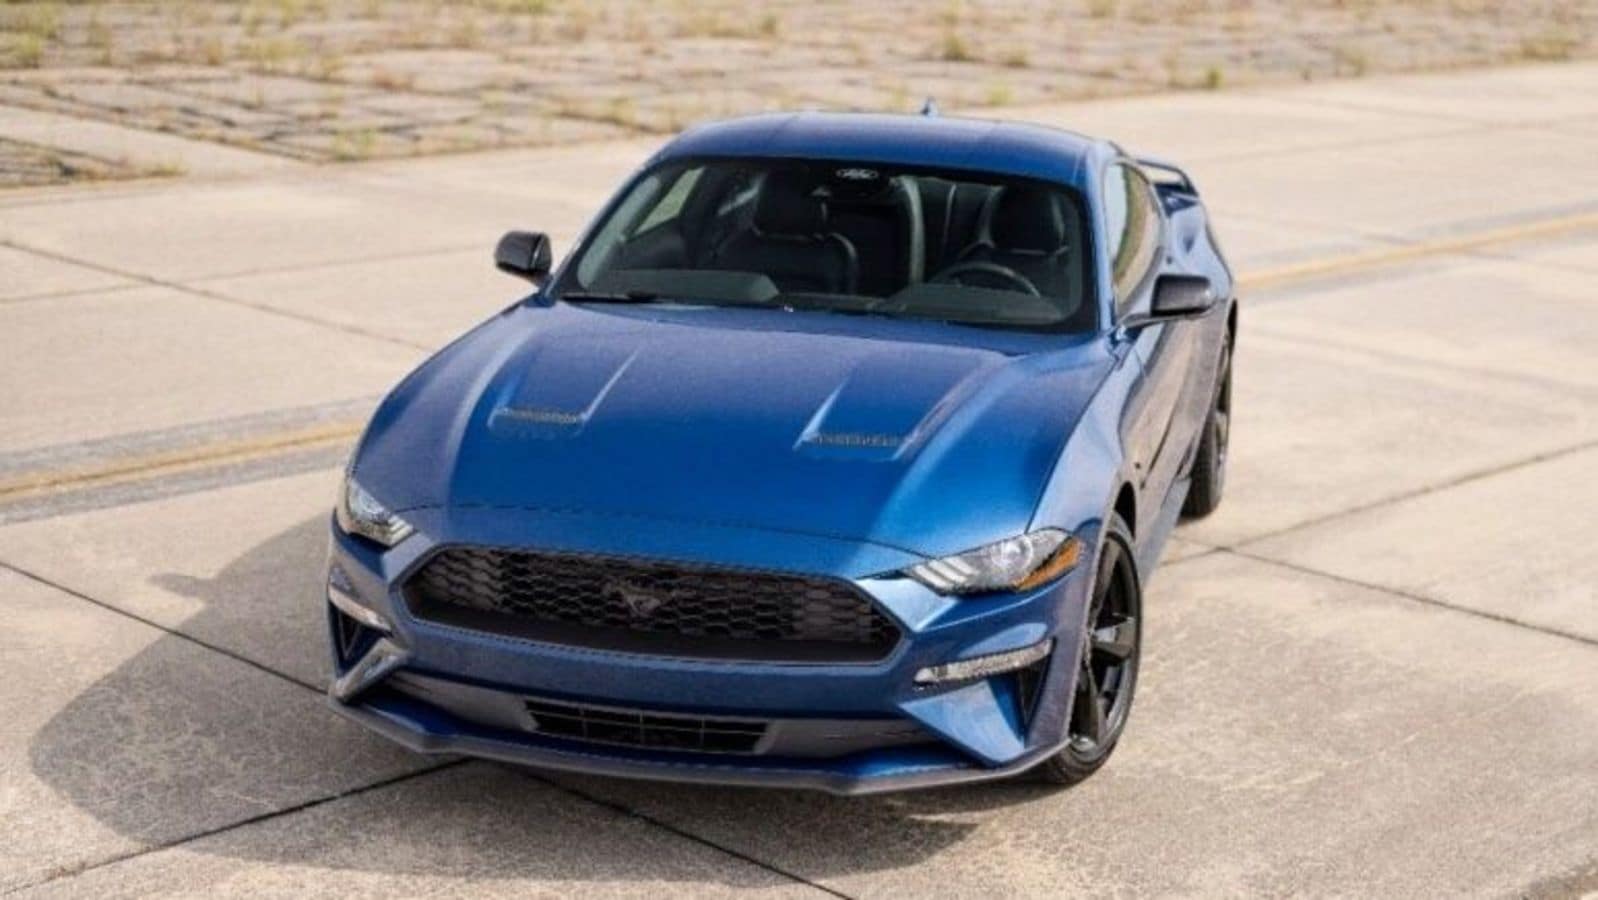 2022 Ford Mustang Introduced In Blacked Out, Sinister Looking Stealth Edition